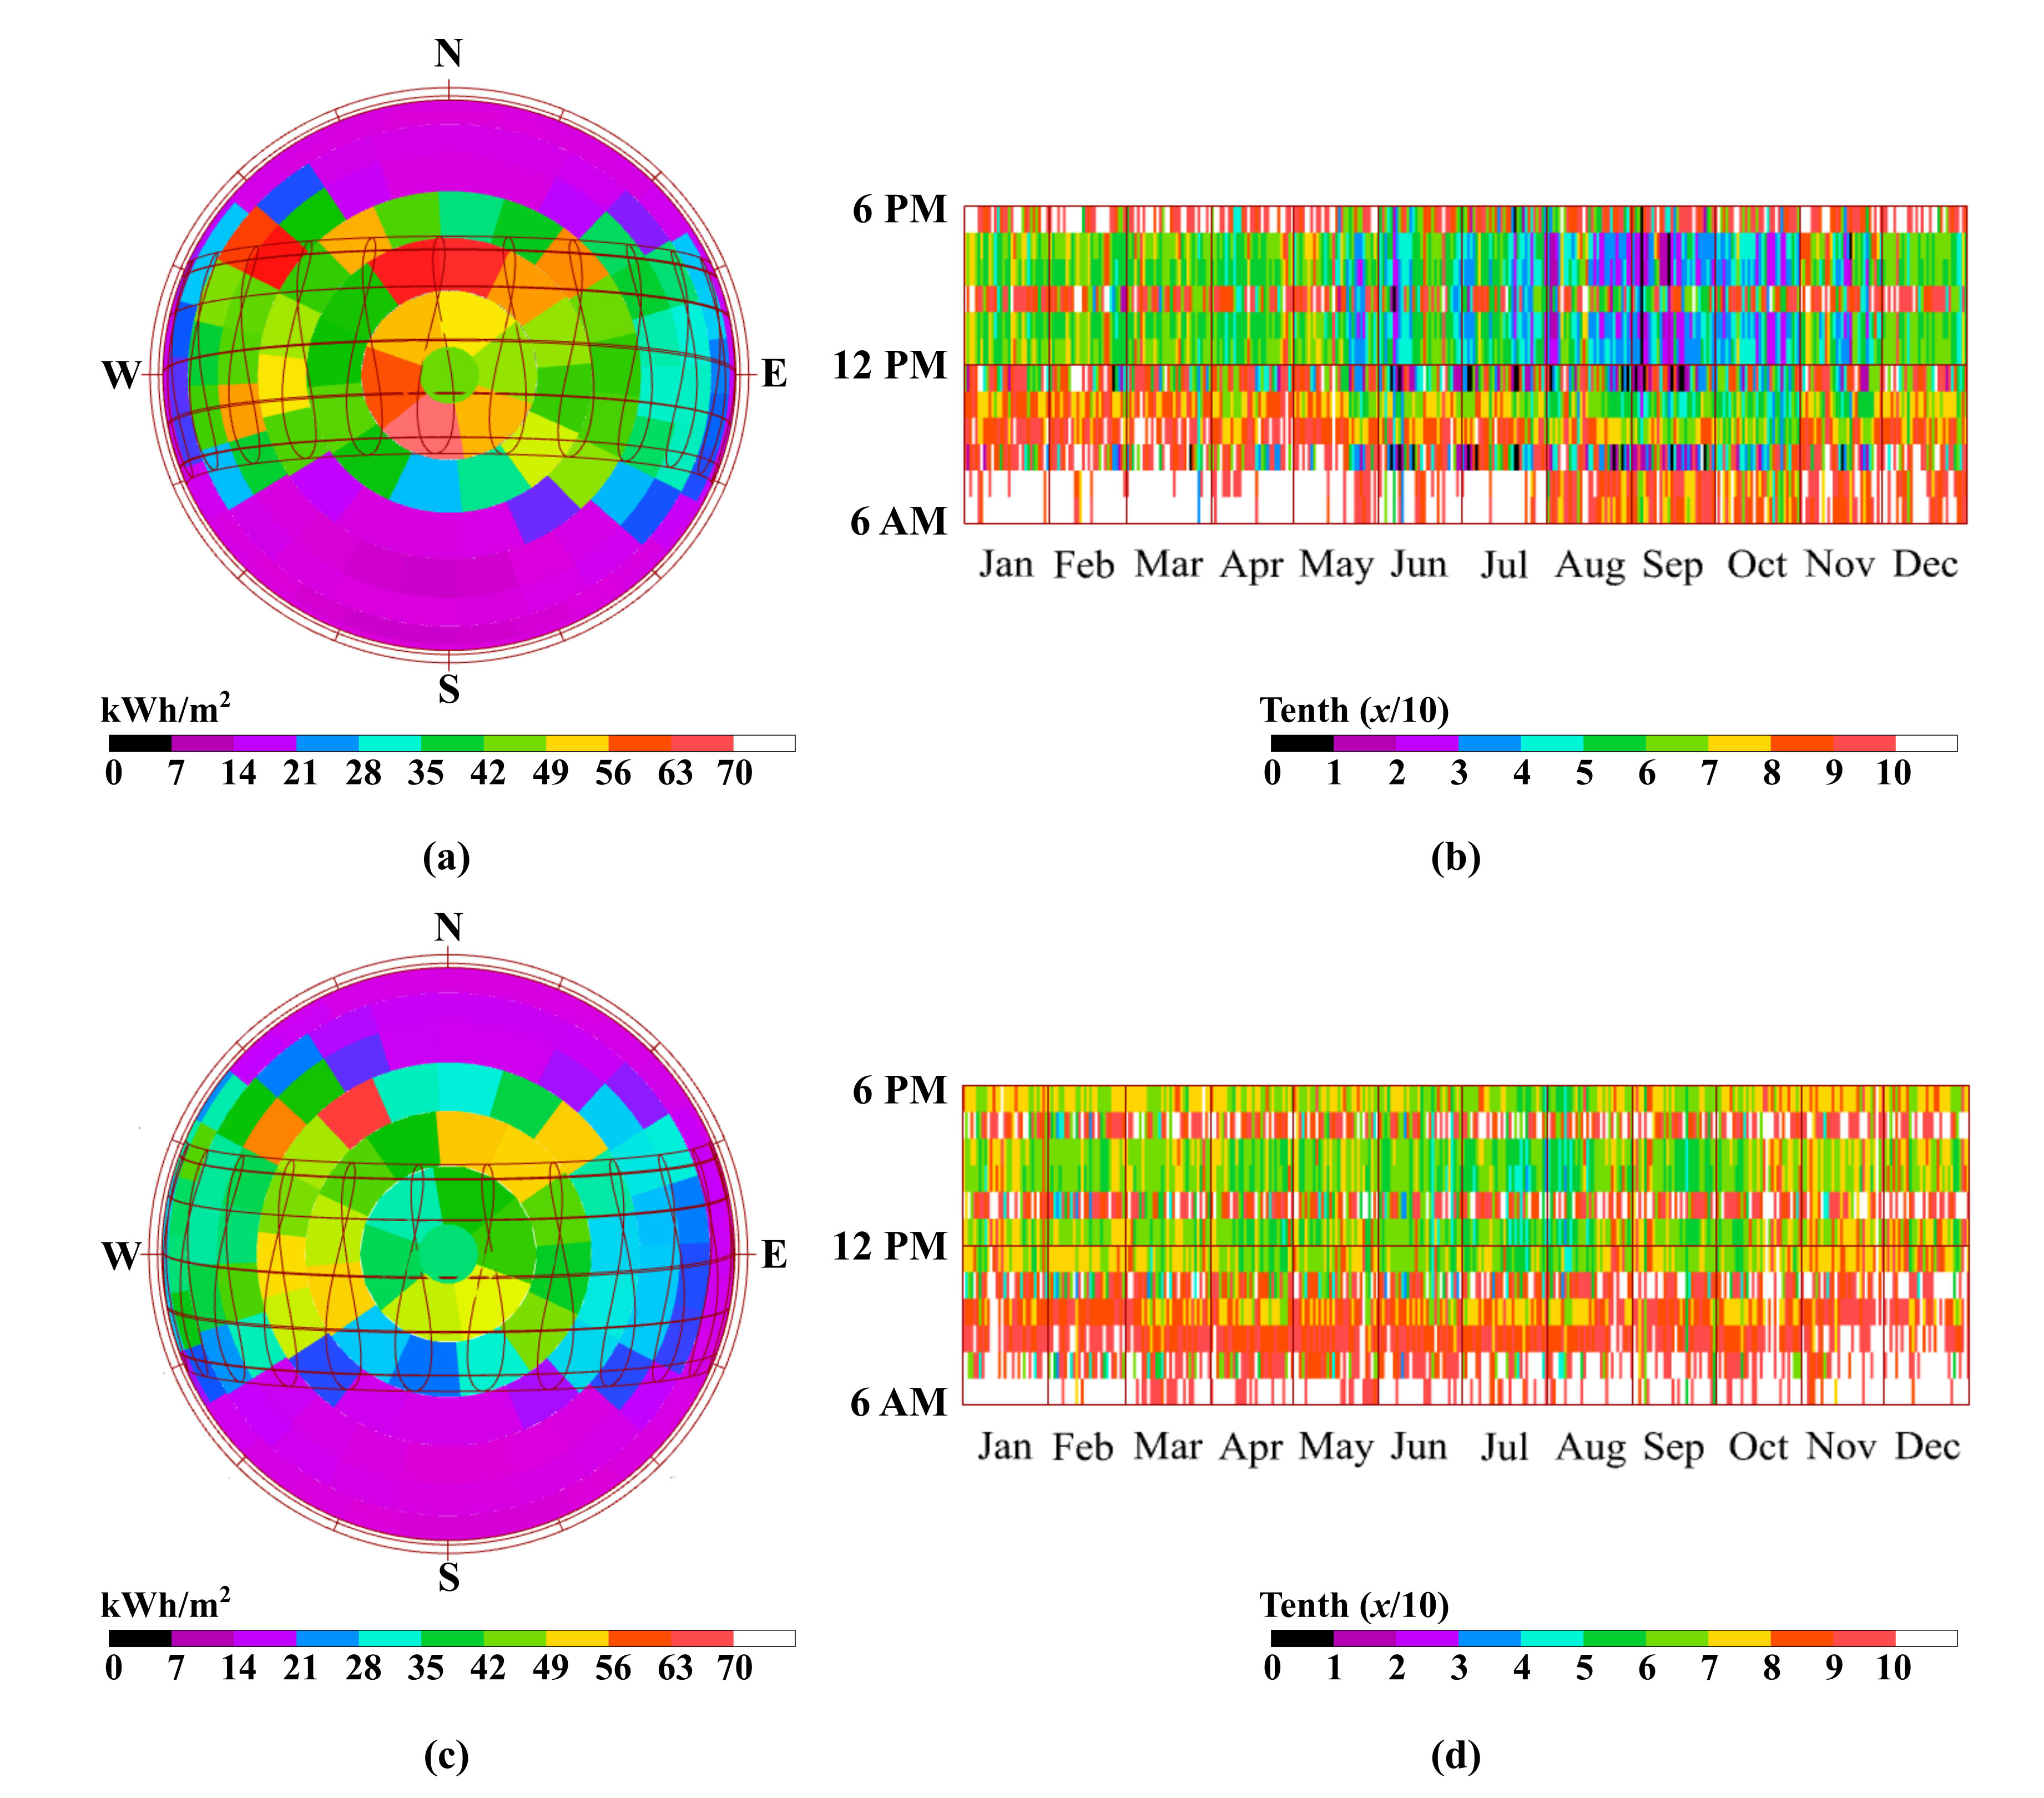 Sun path and total yearly radiation on the sky dome with 145 patches for (a) Bandung and (c) Lhokseumawe; and annual atmospheric conditions in terms of cloud coverage on 0~10 scale (0 for clear sky and 10 for full cloud coverage) in (b) Bandung and (d) Lhokseumawe.